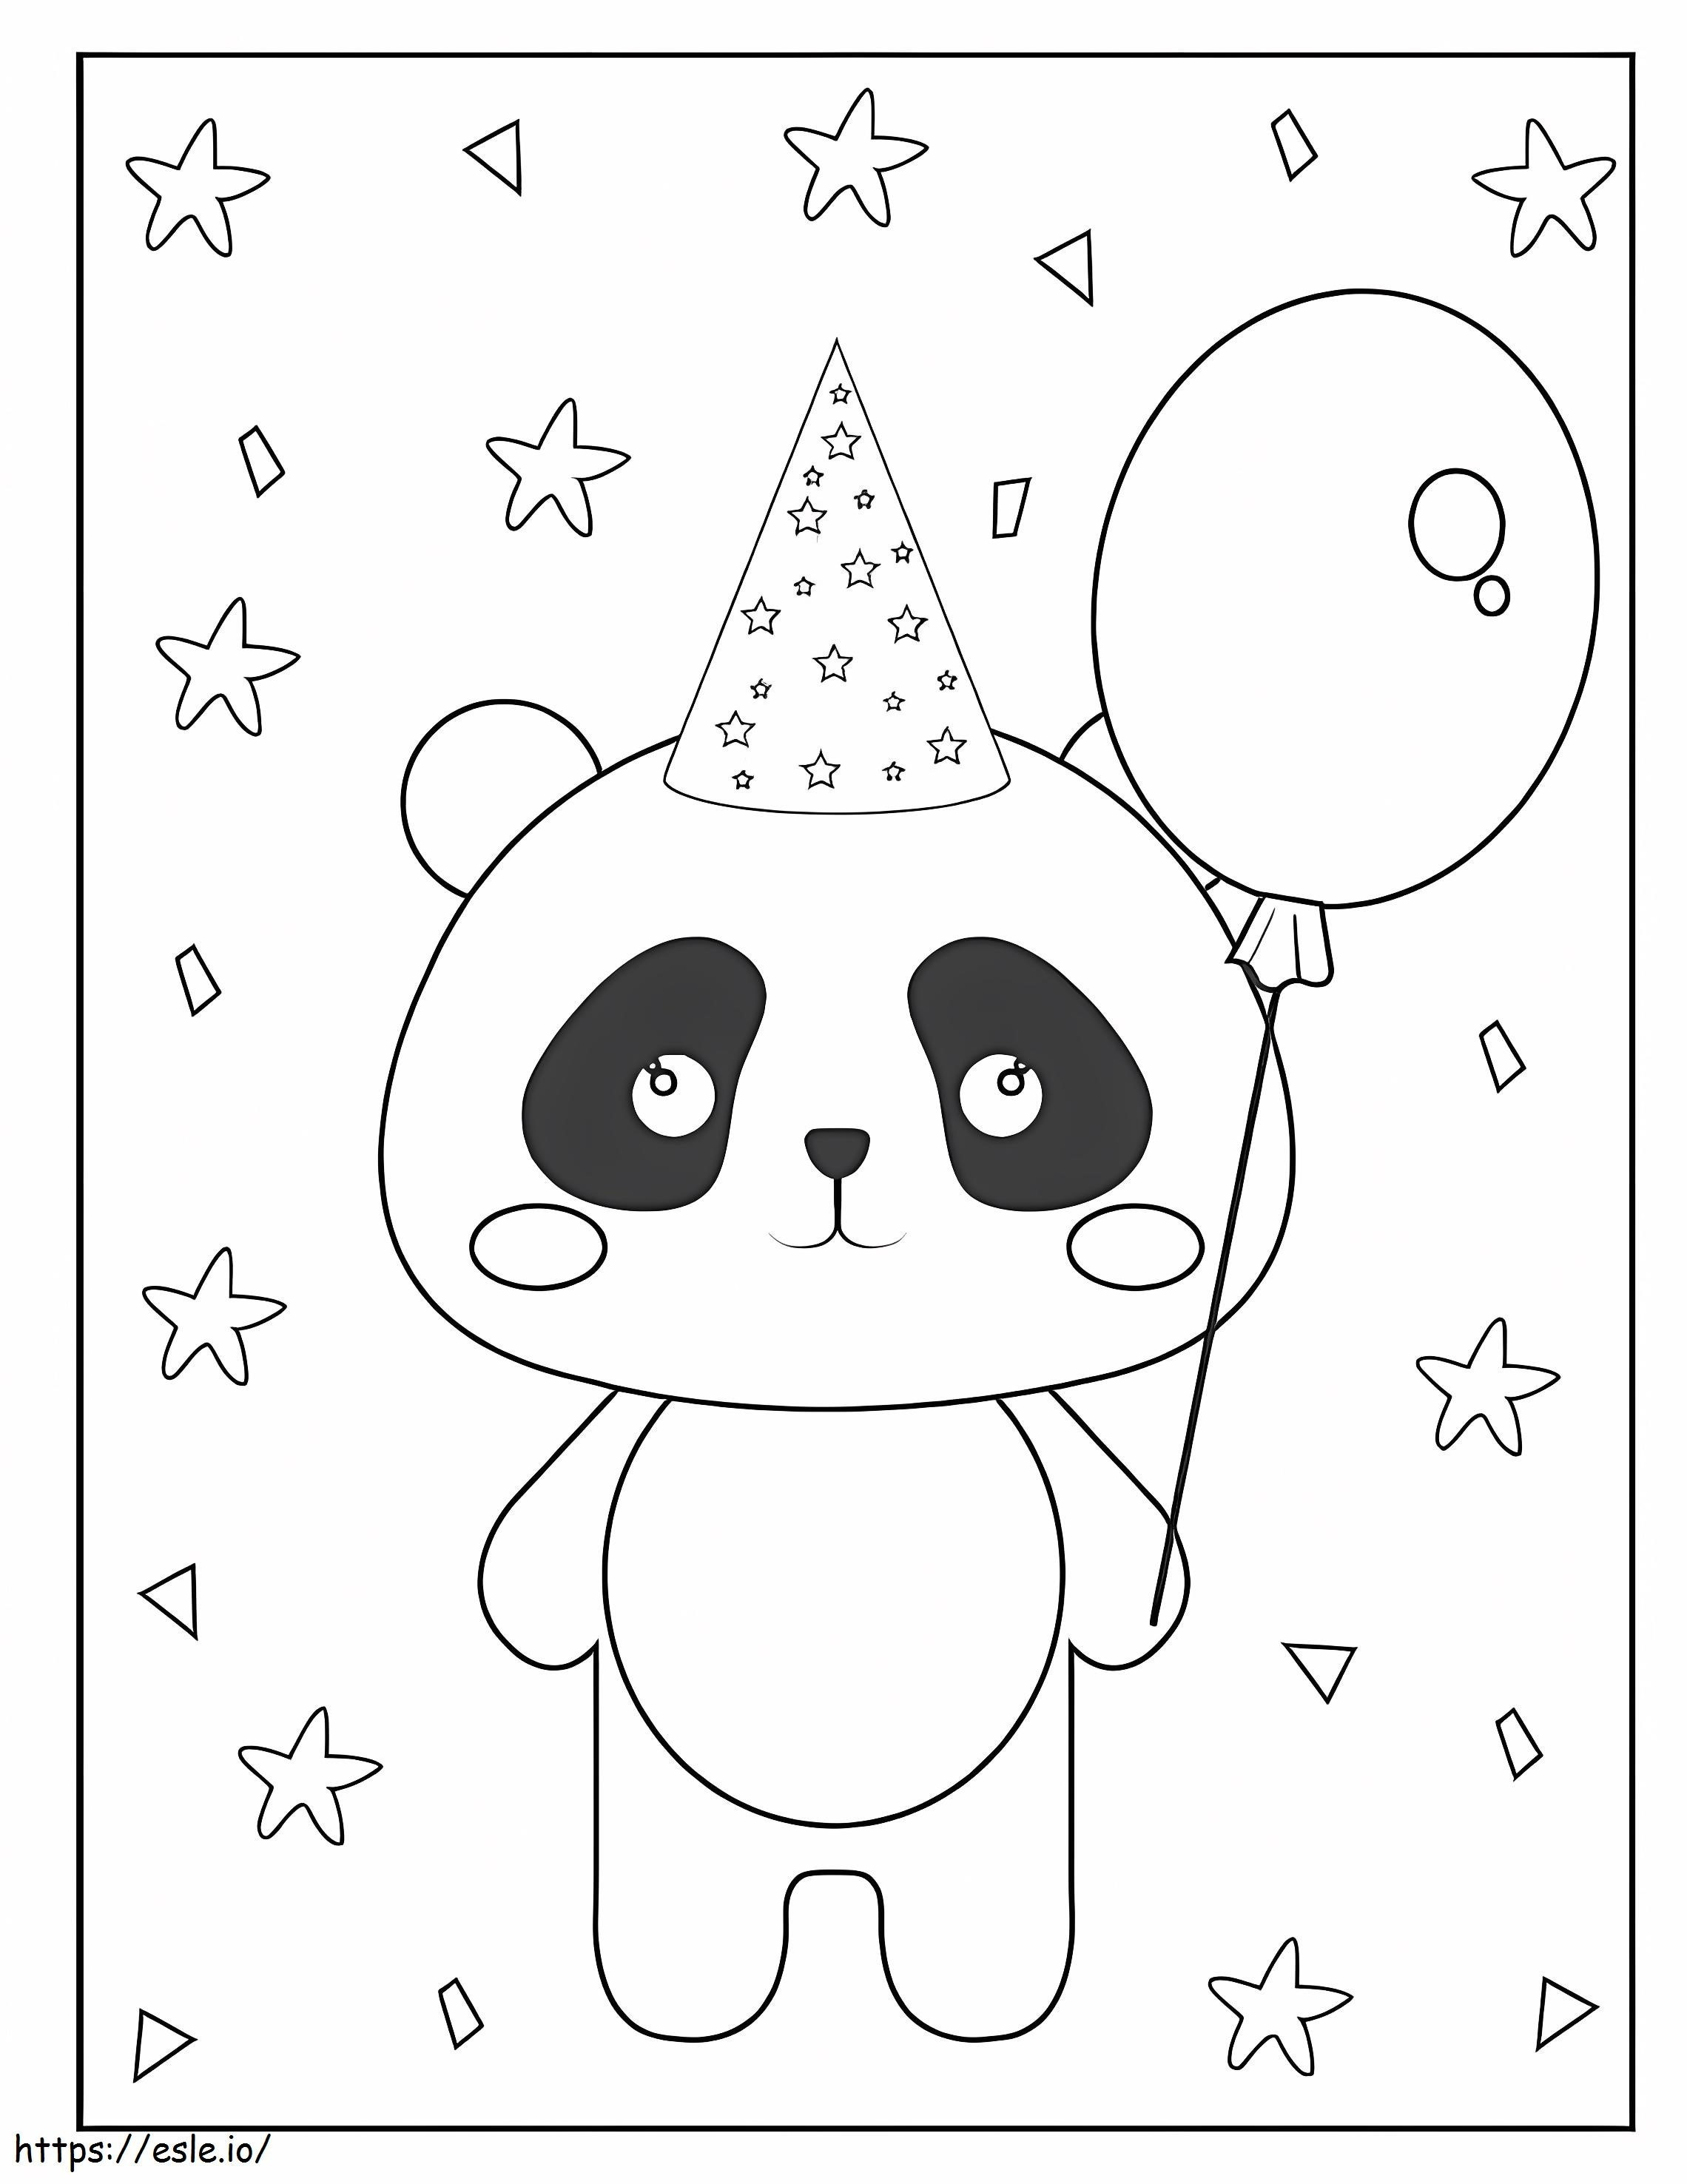 Panda Holding A Balloon At The Birthday Party coloring page